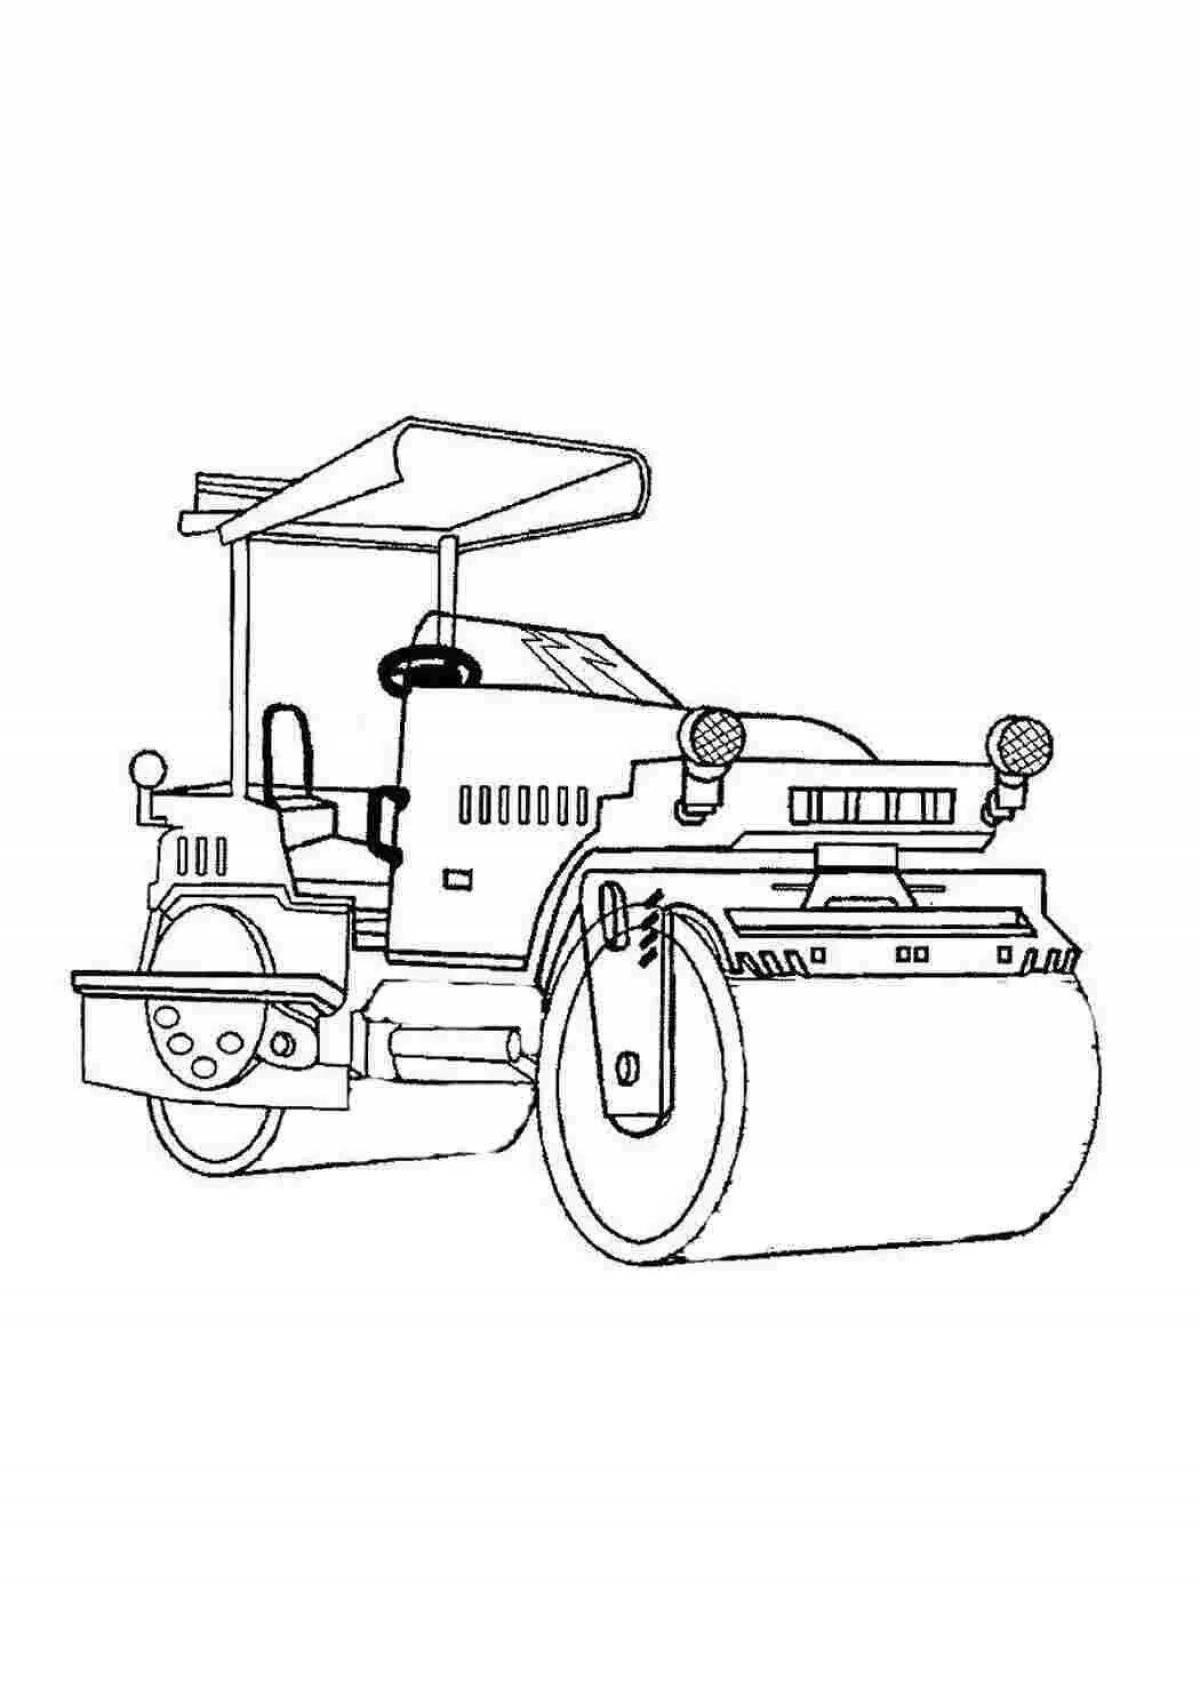 Attractive working machines coloring book